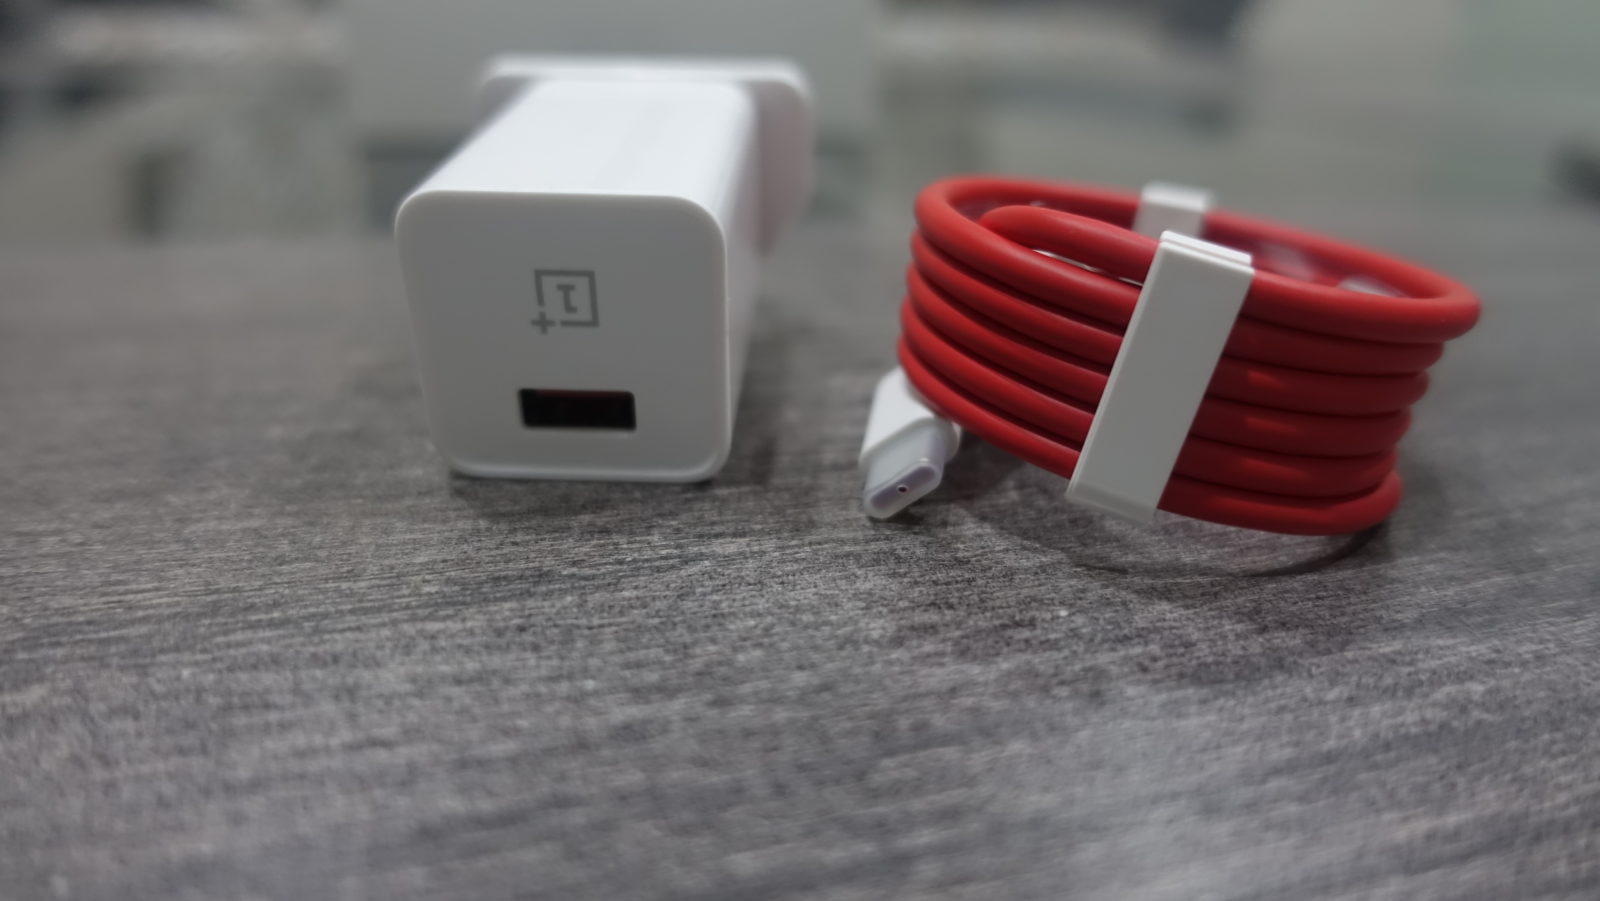 Oneplus 5T charger and data cable